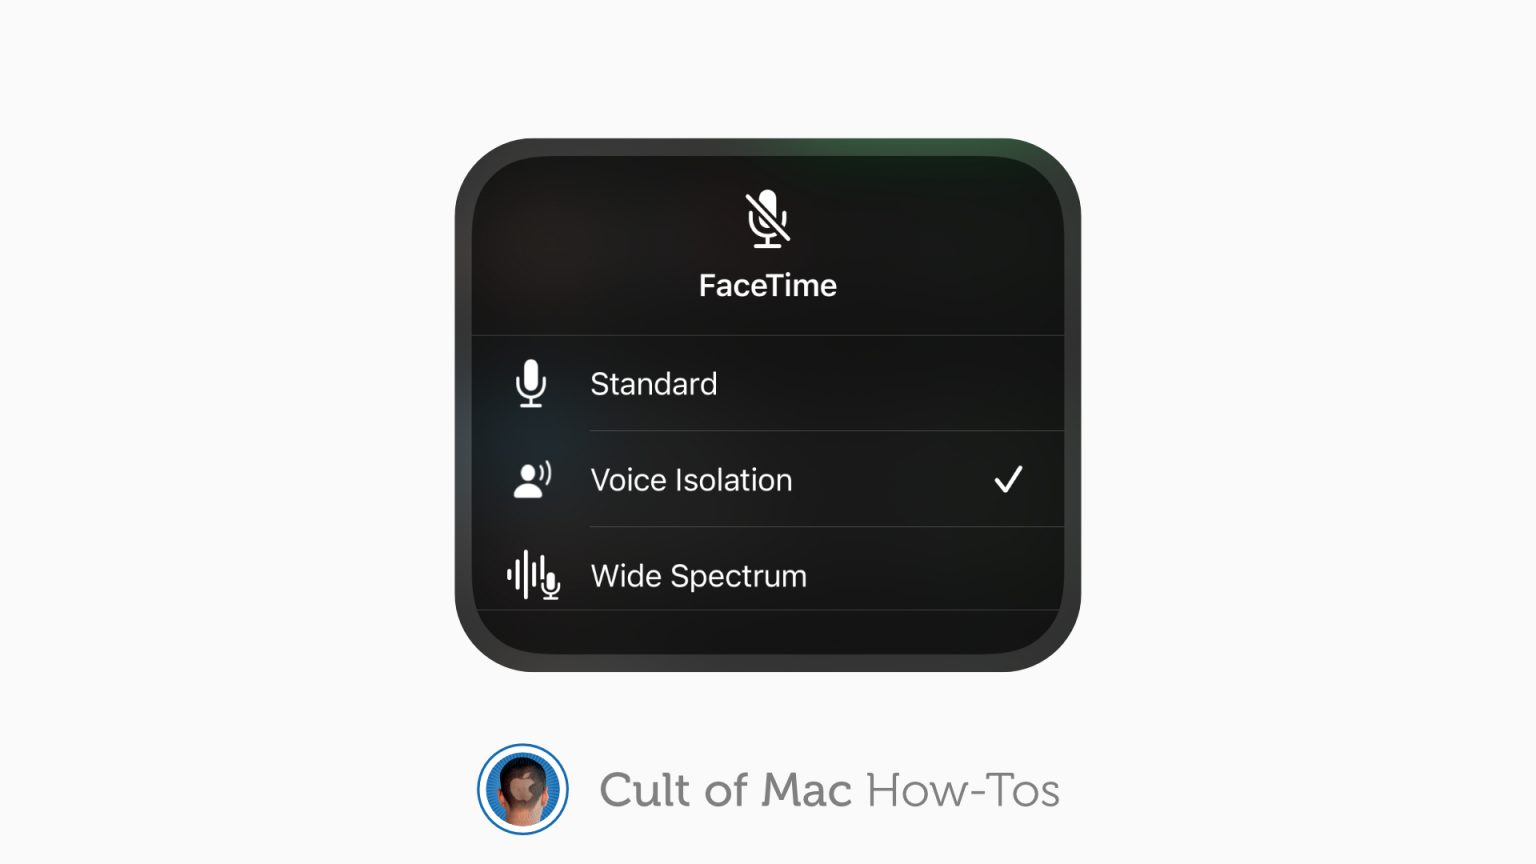 Enable voice isolation for FaceTime